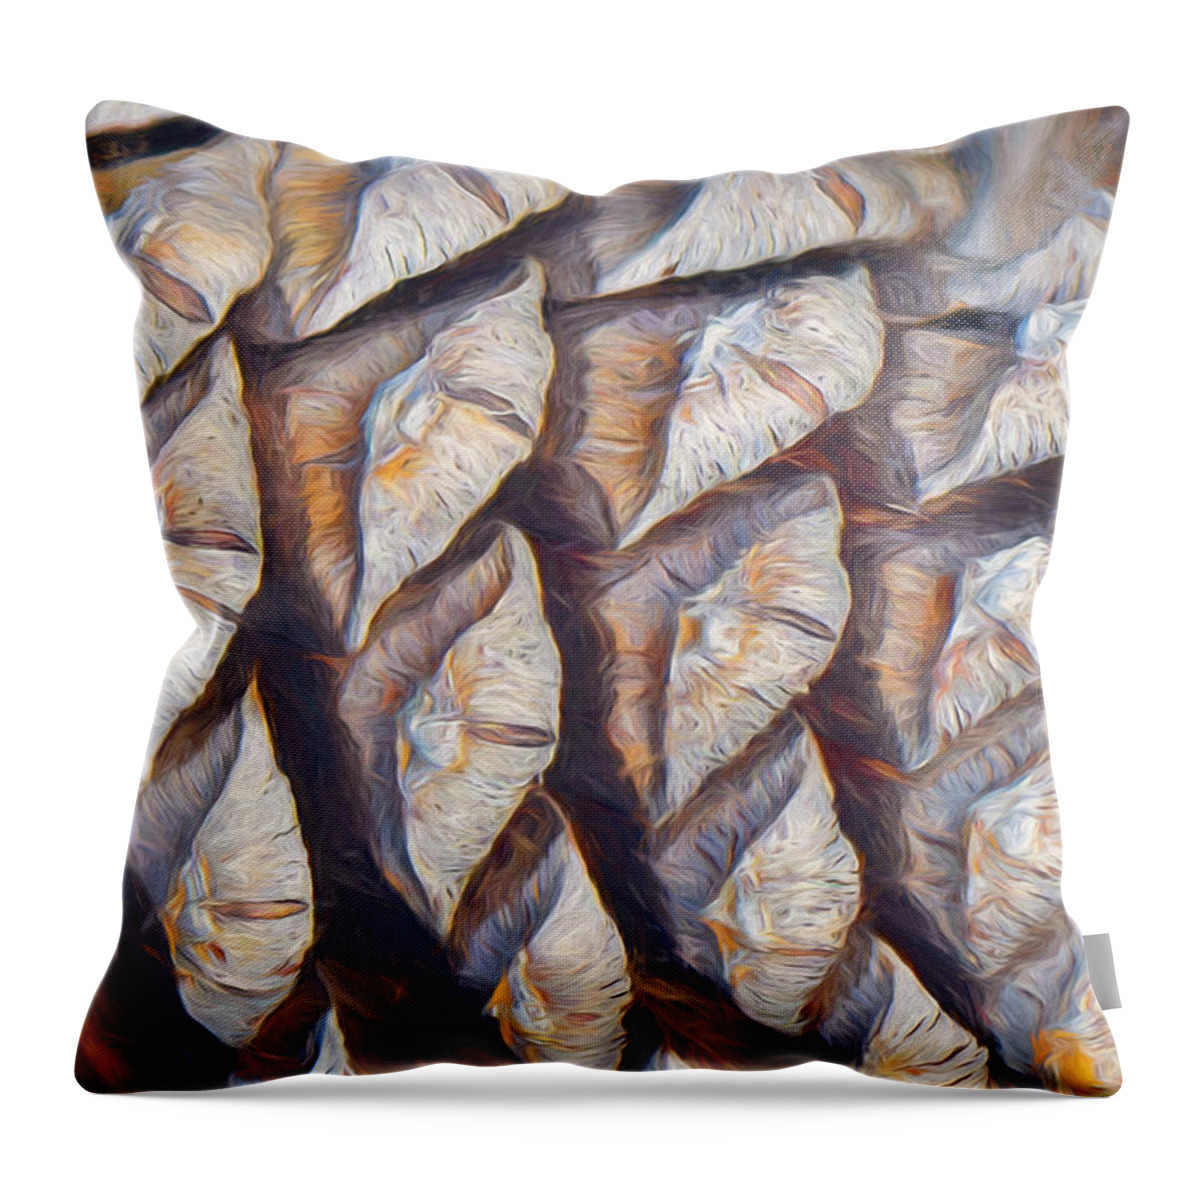 Imaginary Lands Throw Pillow featuring the digital art Canyons Of The Blackjack Pine by Becky Titus